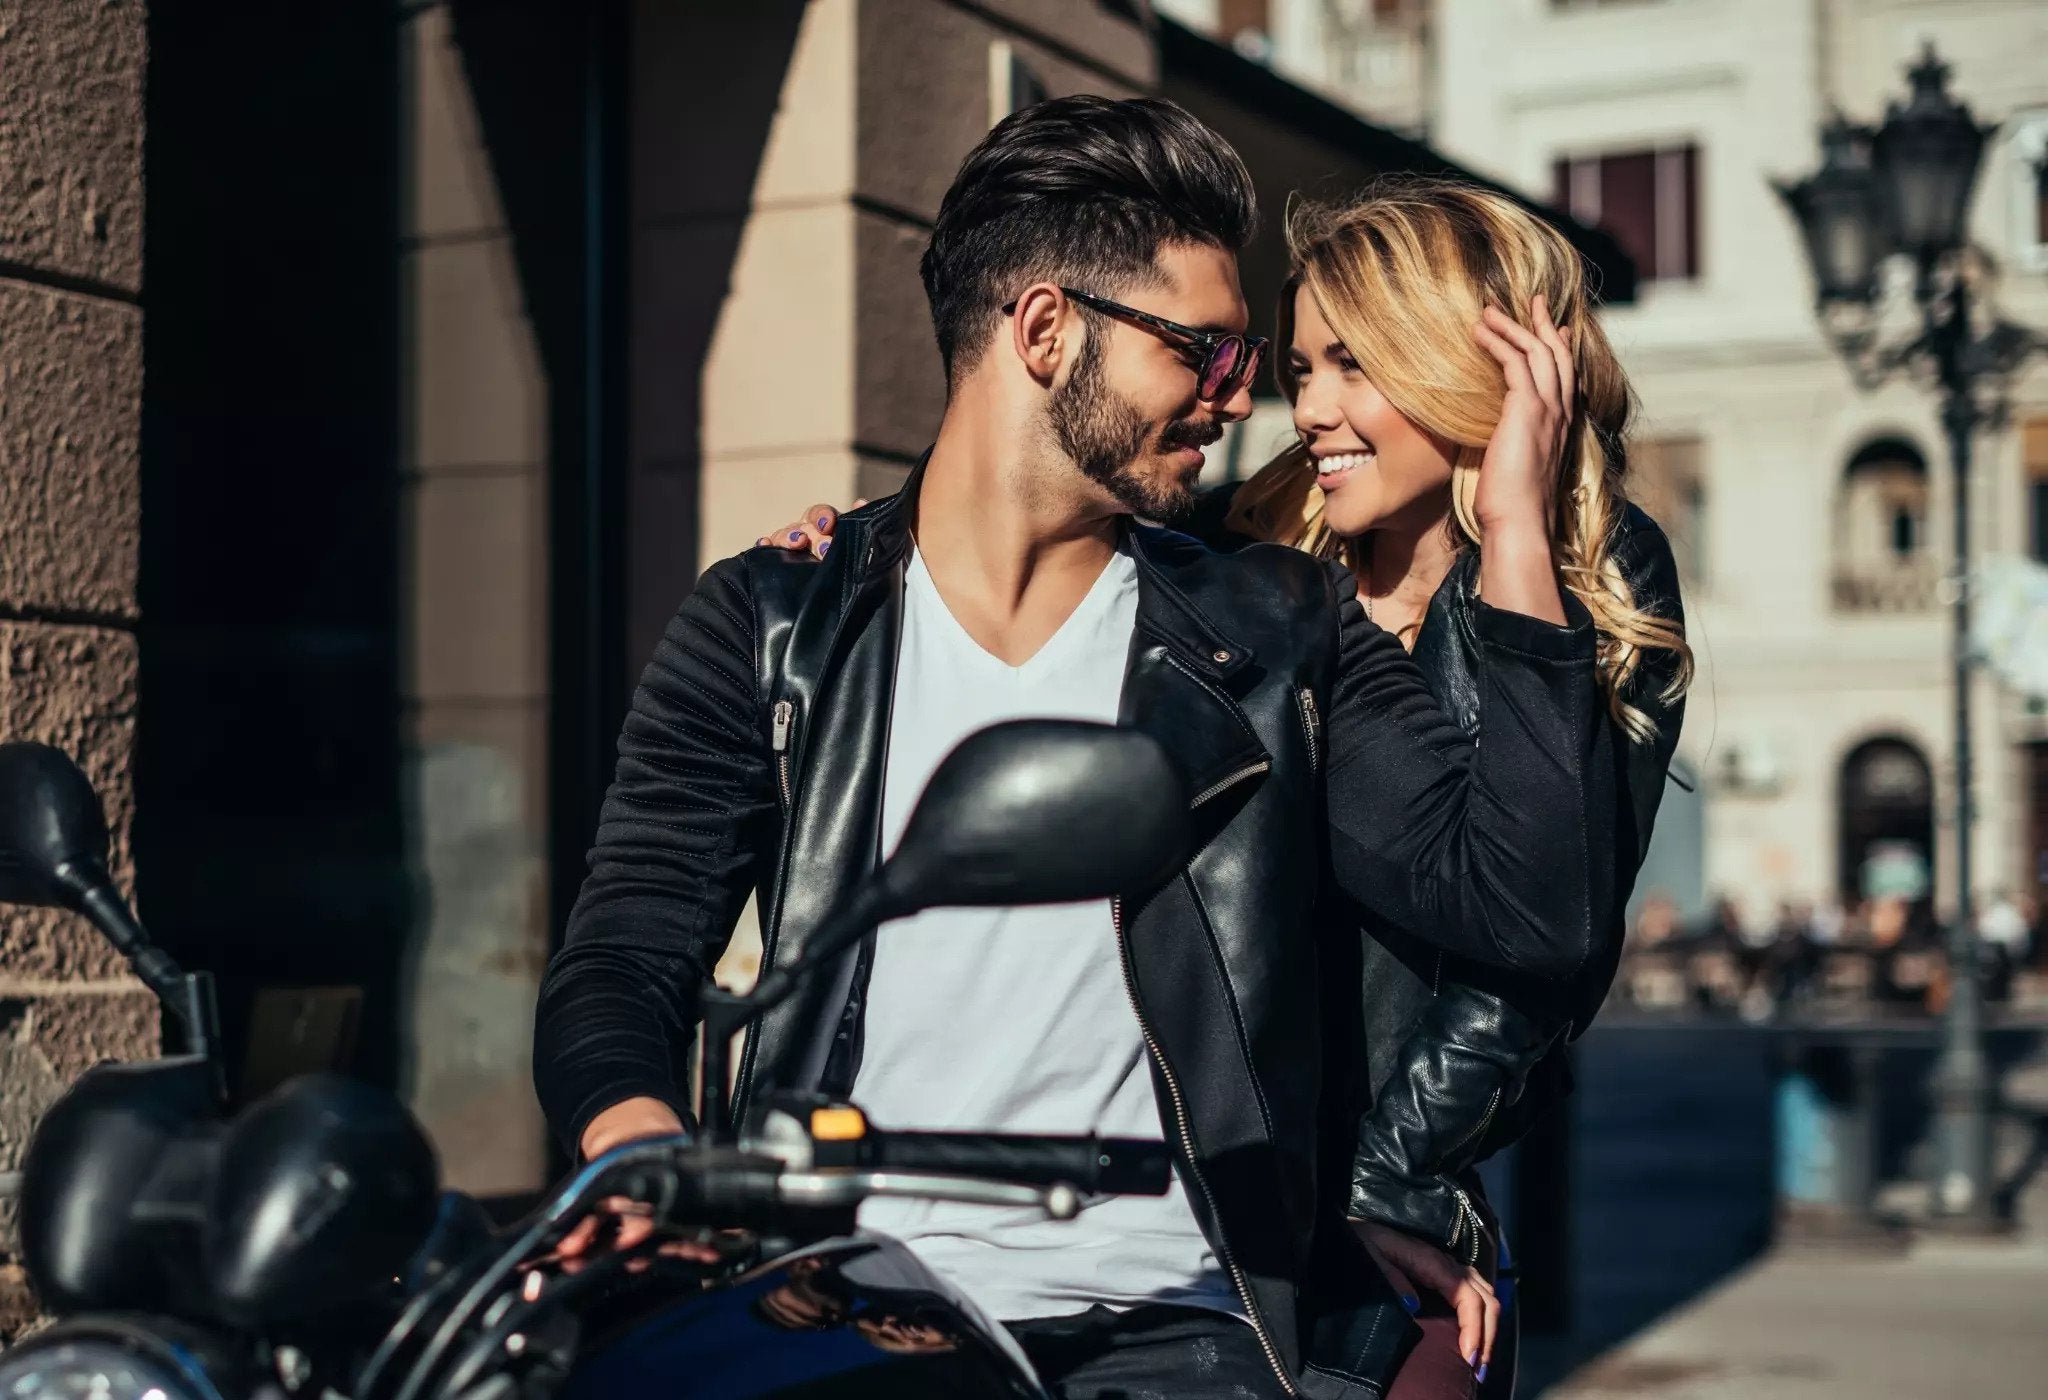 Leather Jackets Get the Attention of Women: Learn Why?